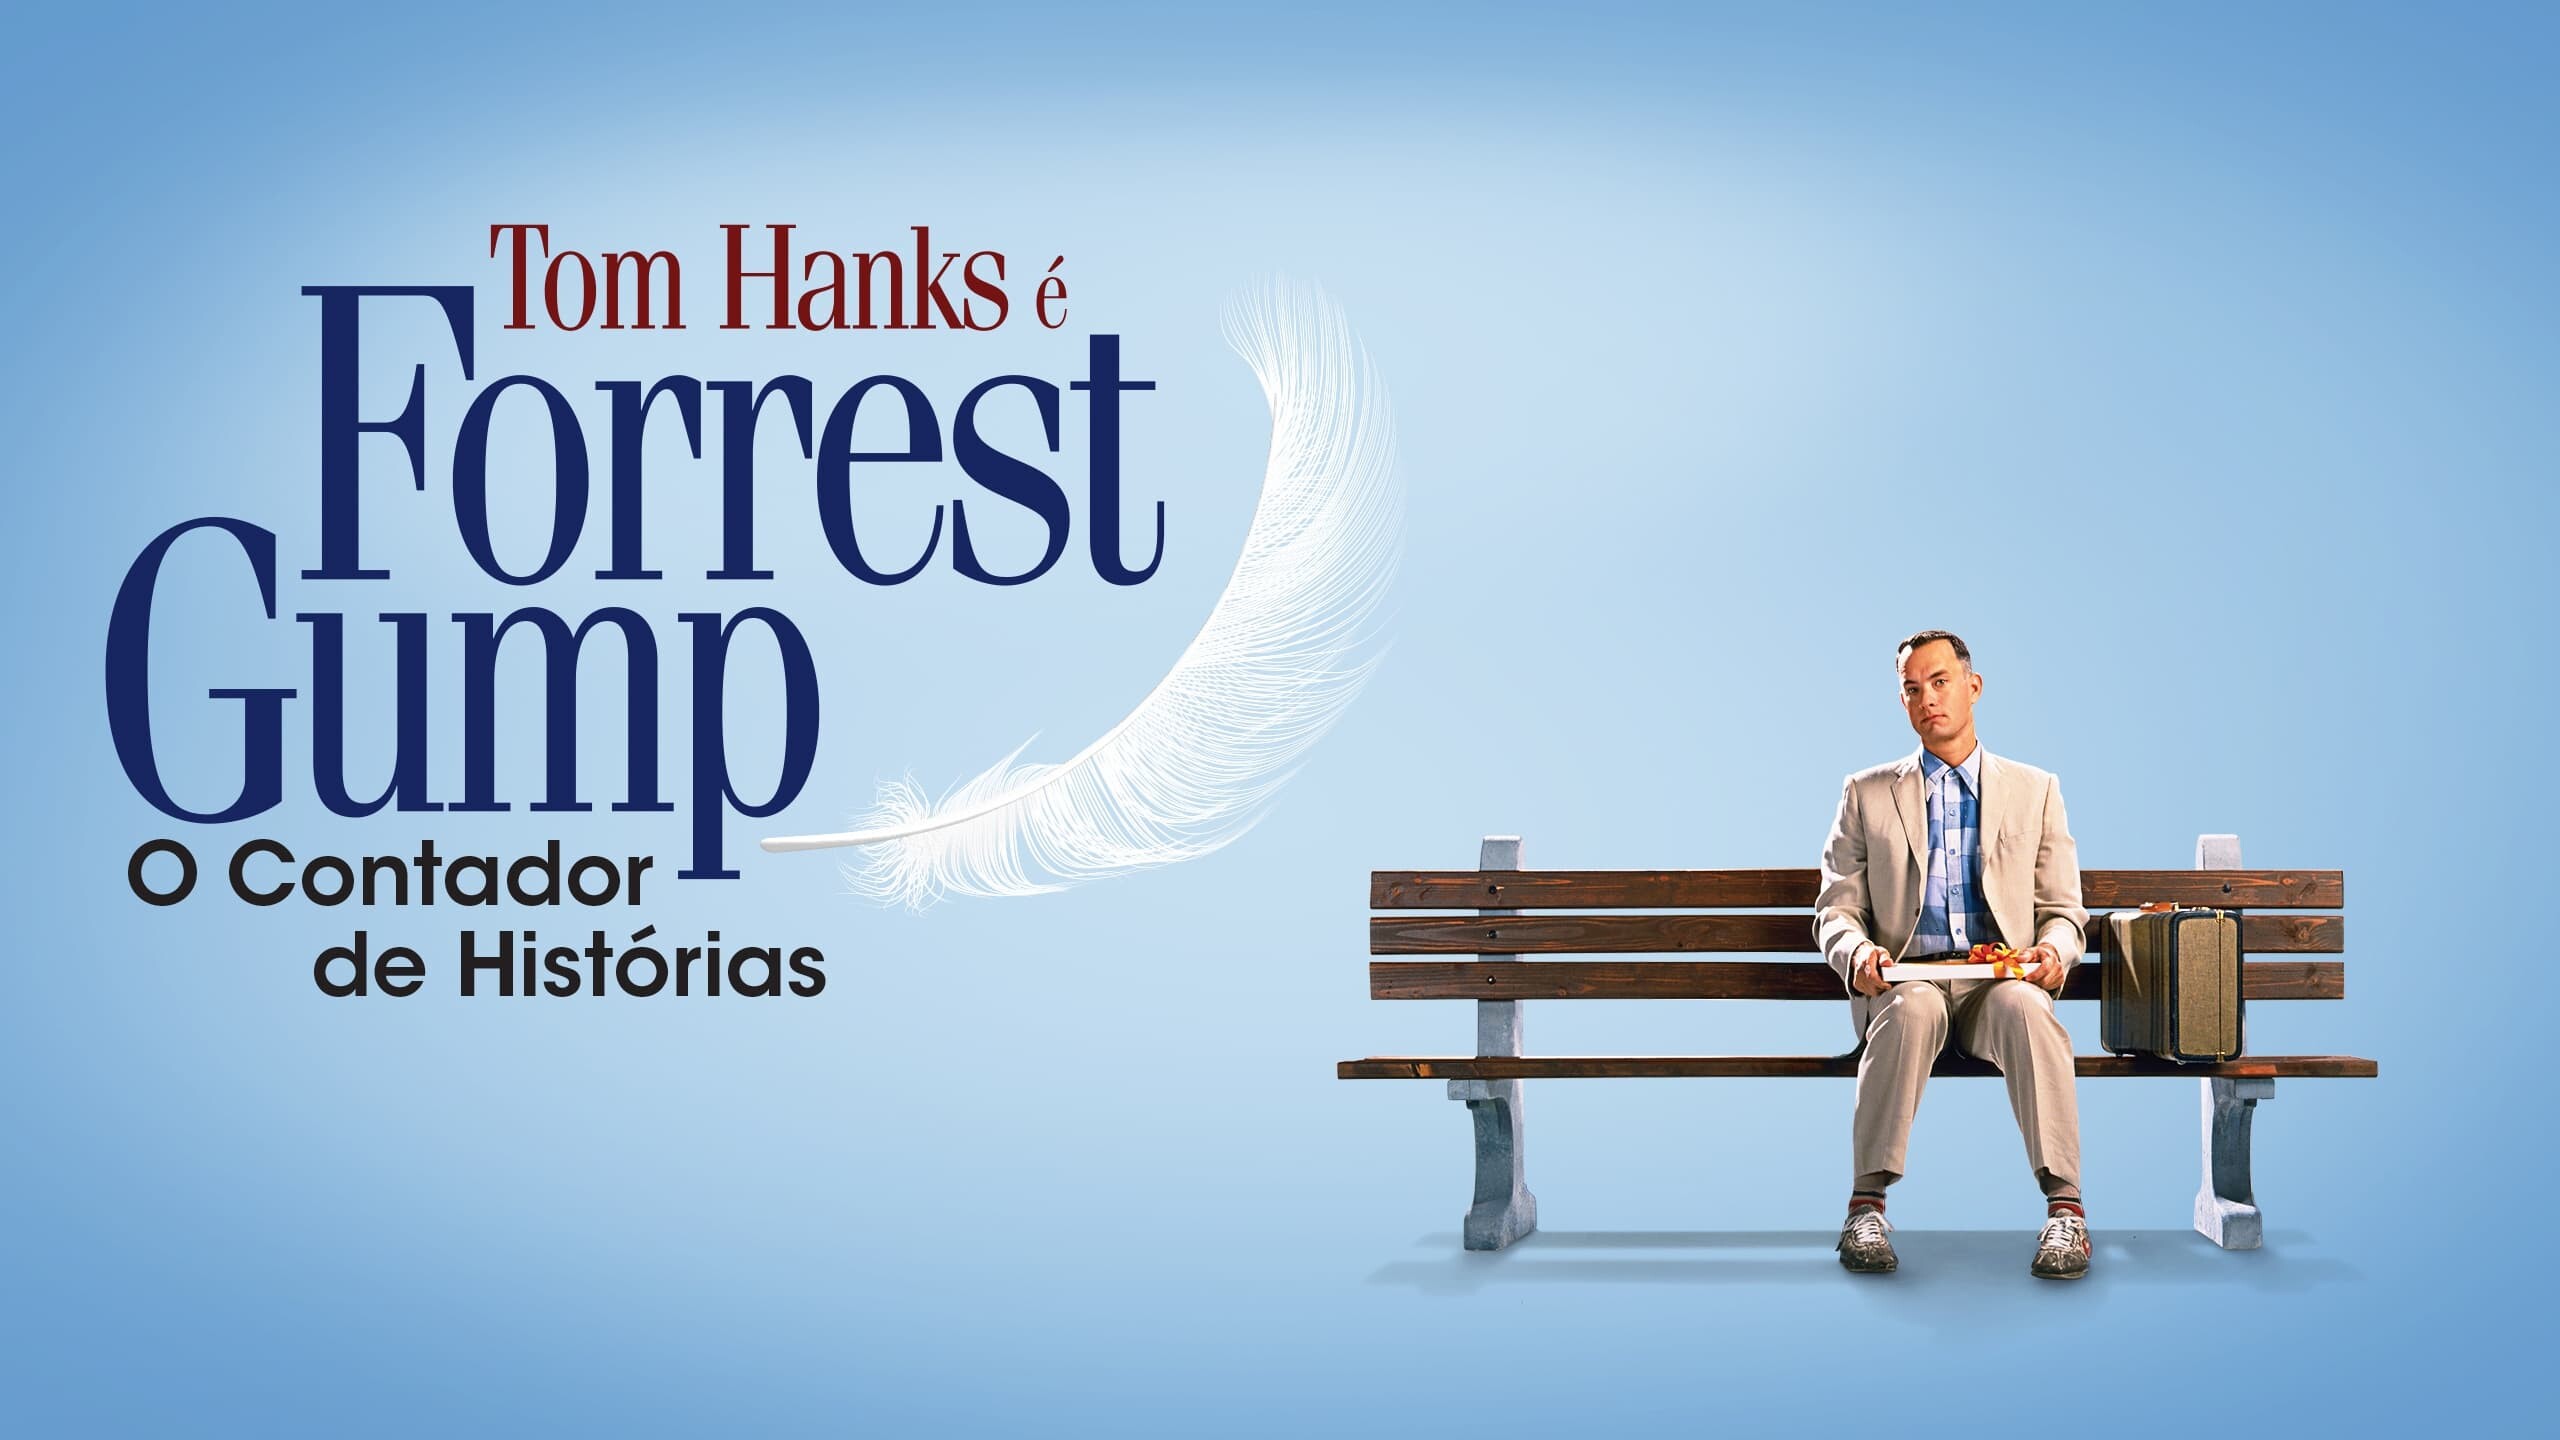 Forrest Gump: The plot focuses on the slow-witted but kind-hearted Alabama man. 2560x1440 HD Wallpaper.